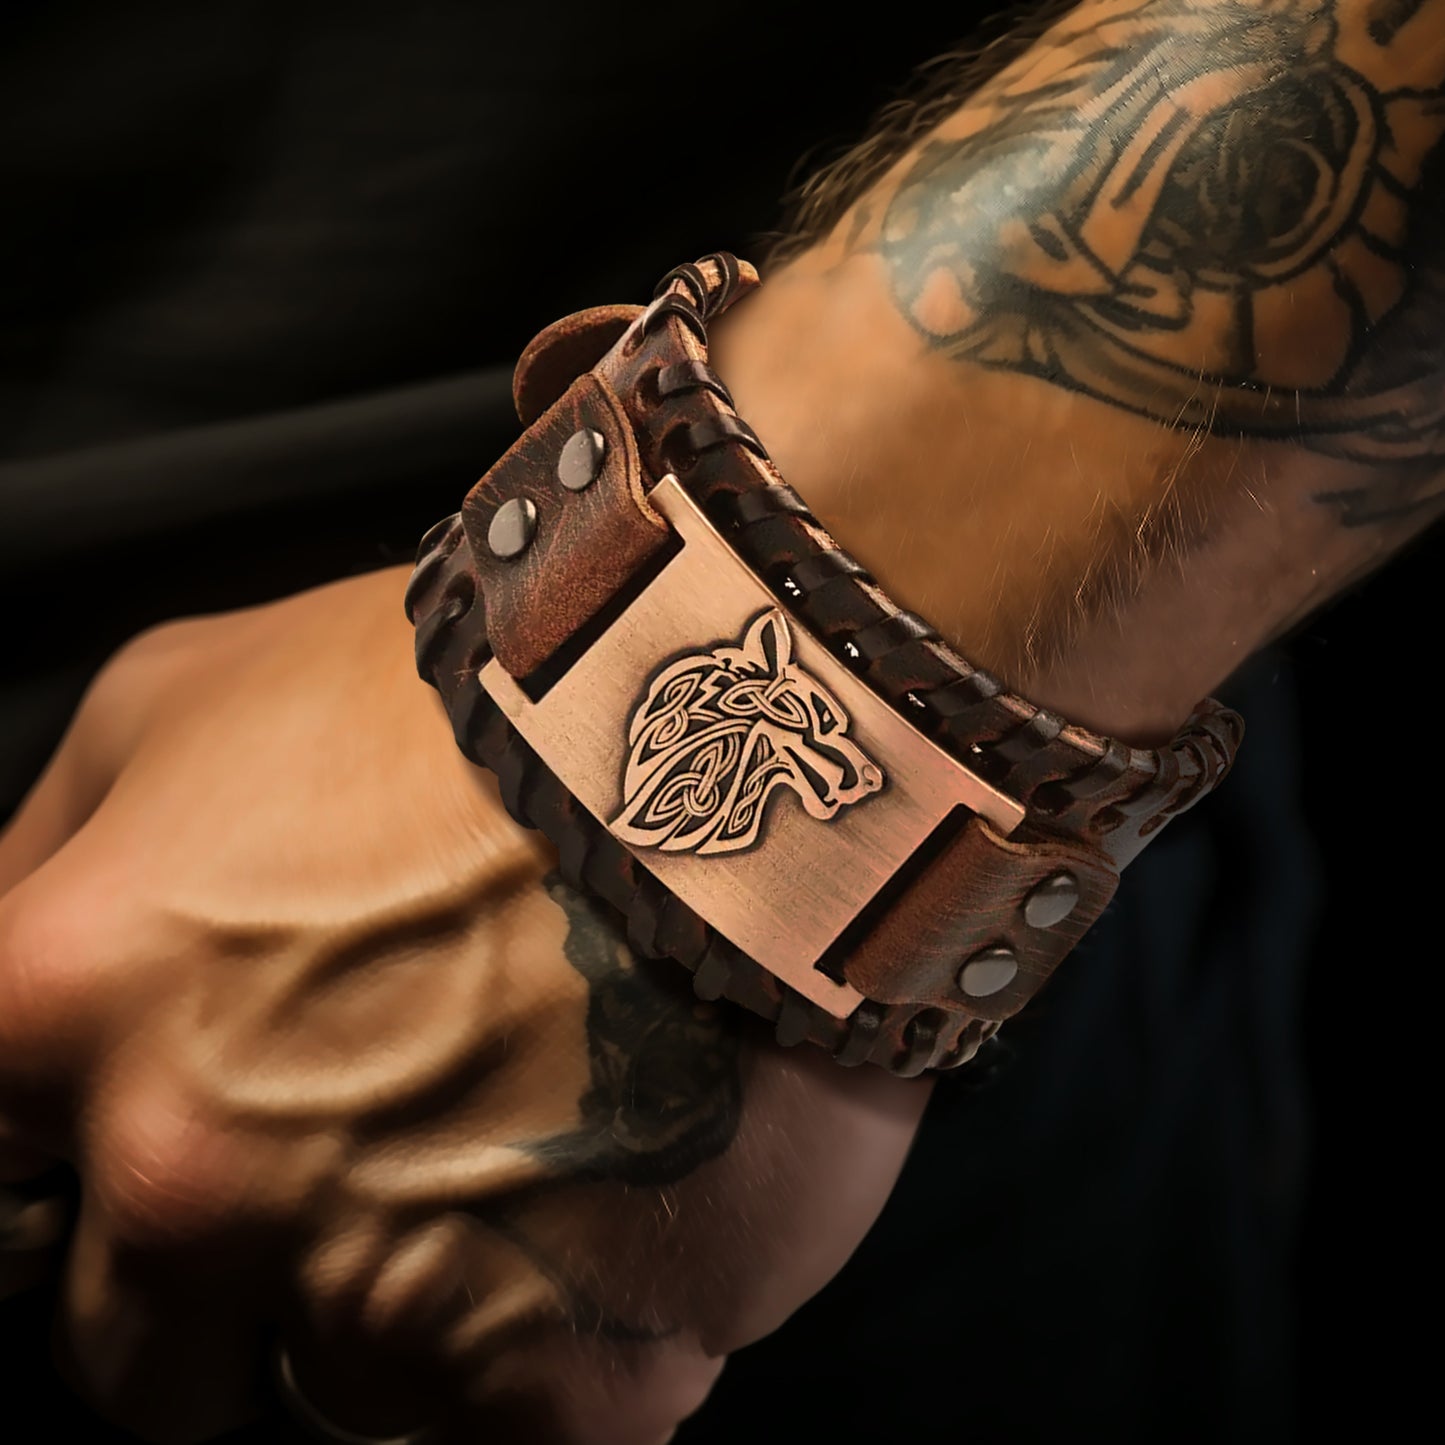 A picture of a man's tattooed arm wearing a brown leather cuff bracelet that features a copper plate with a wolf's head engraving on it.